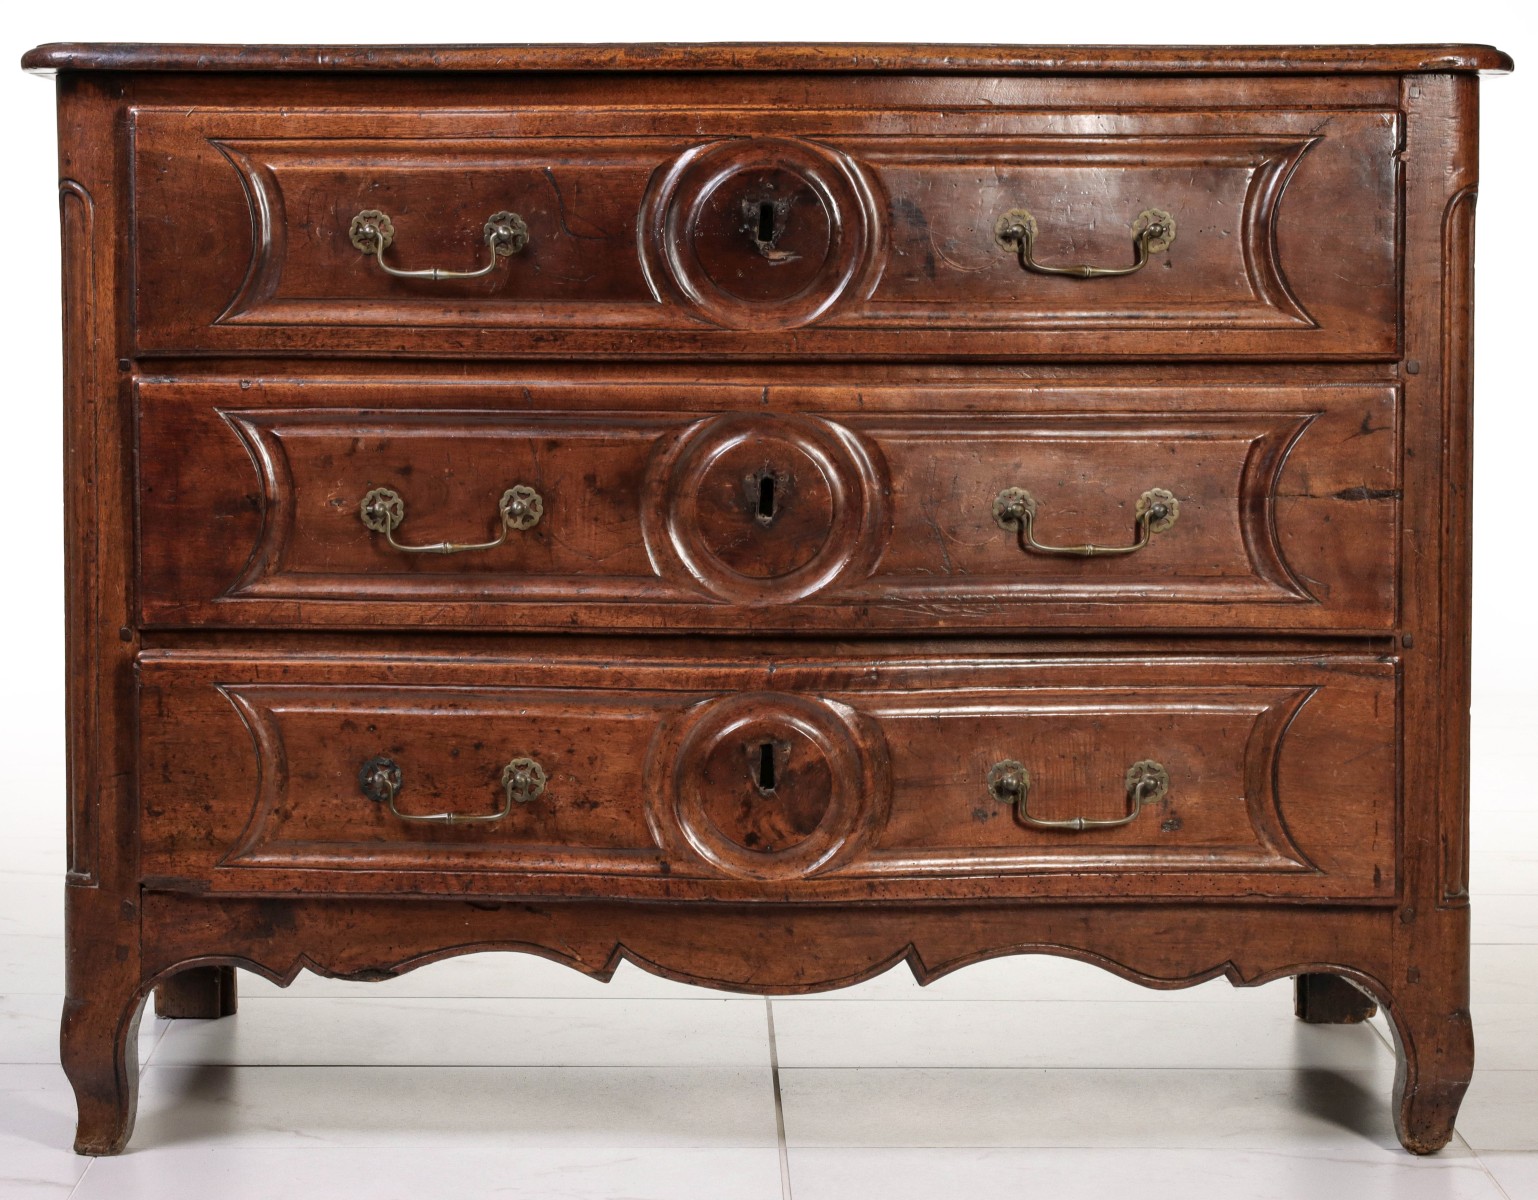 A FINE LOUIS XV PERIOD THREE DRAWER COMMODE C 1750